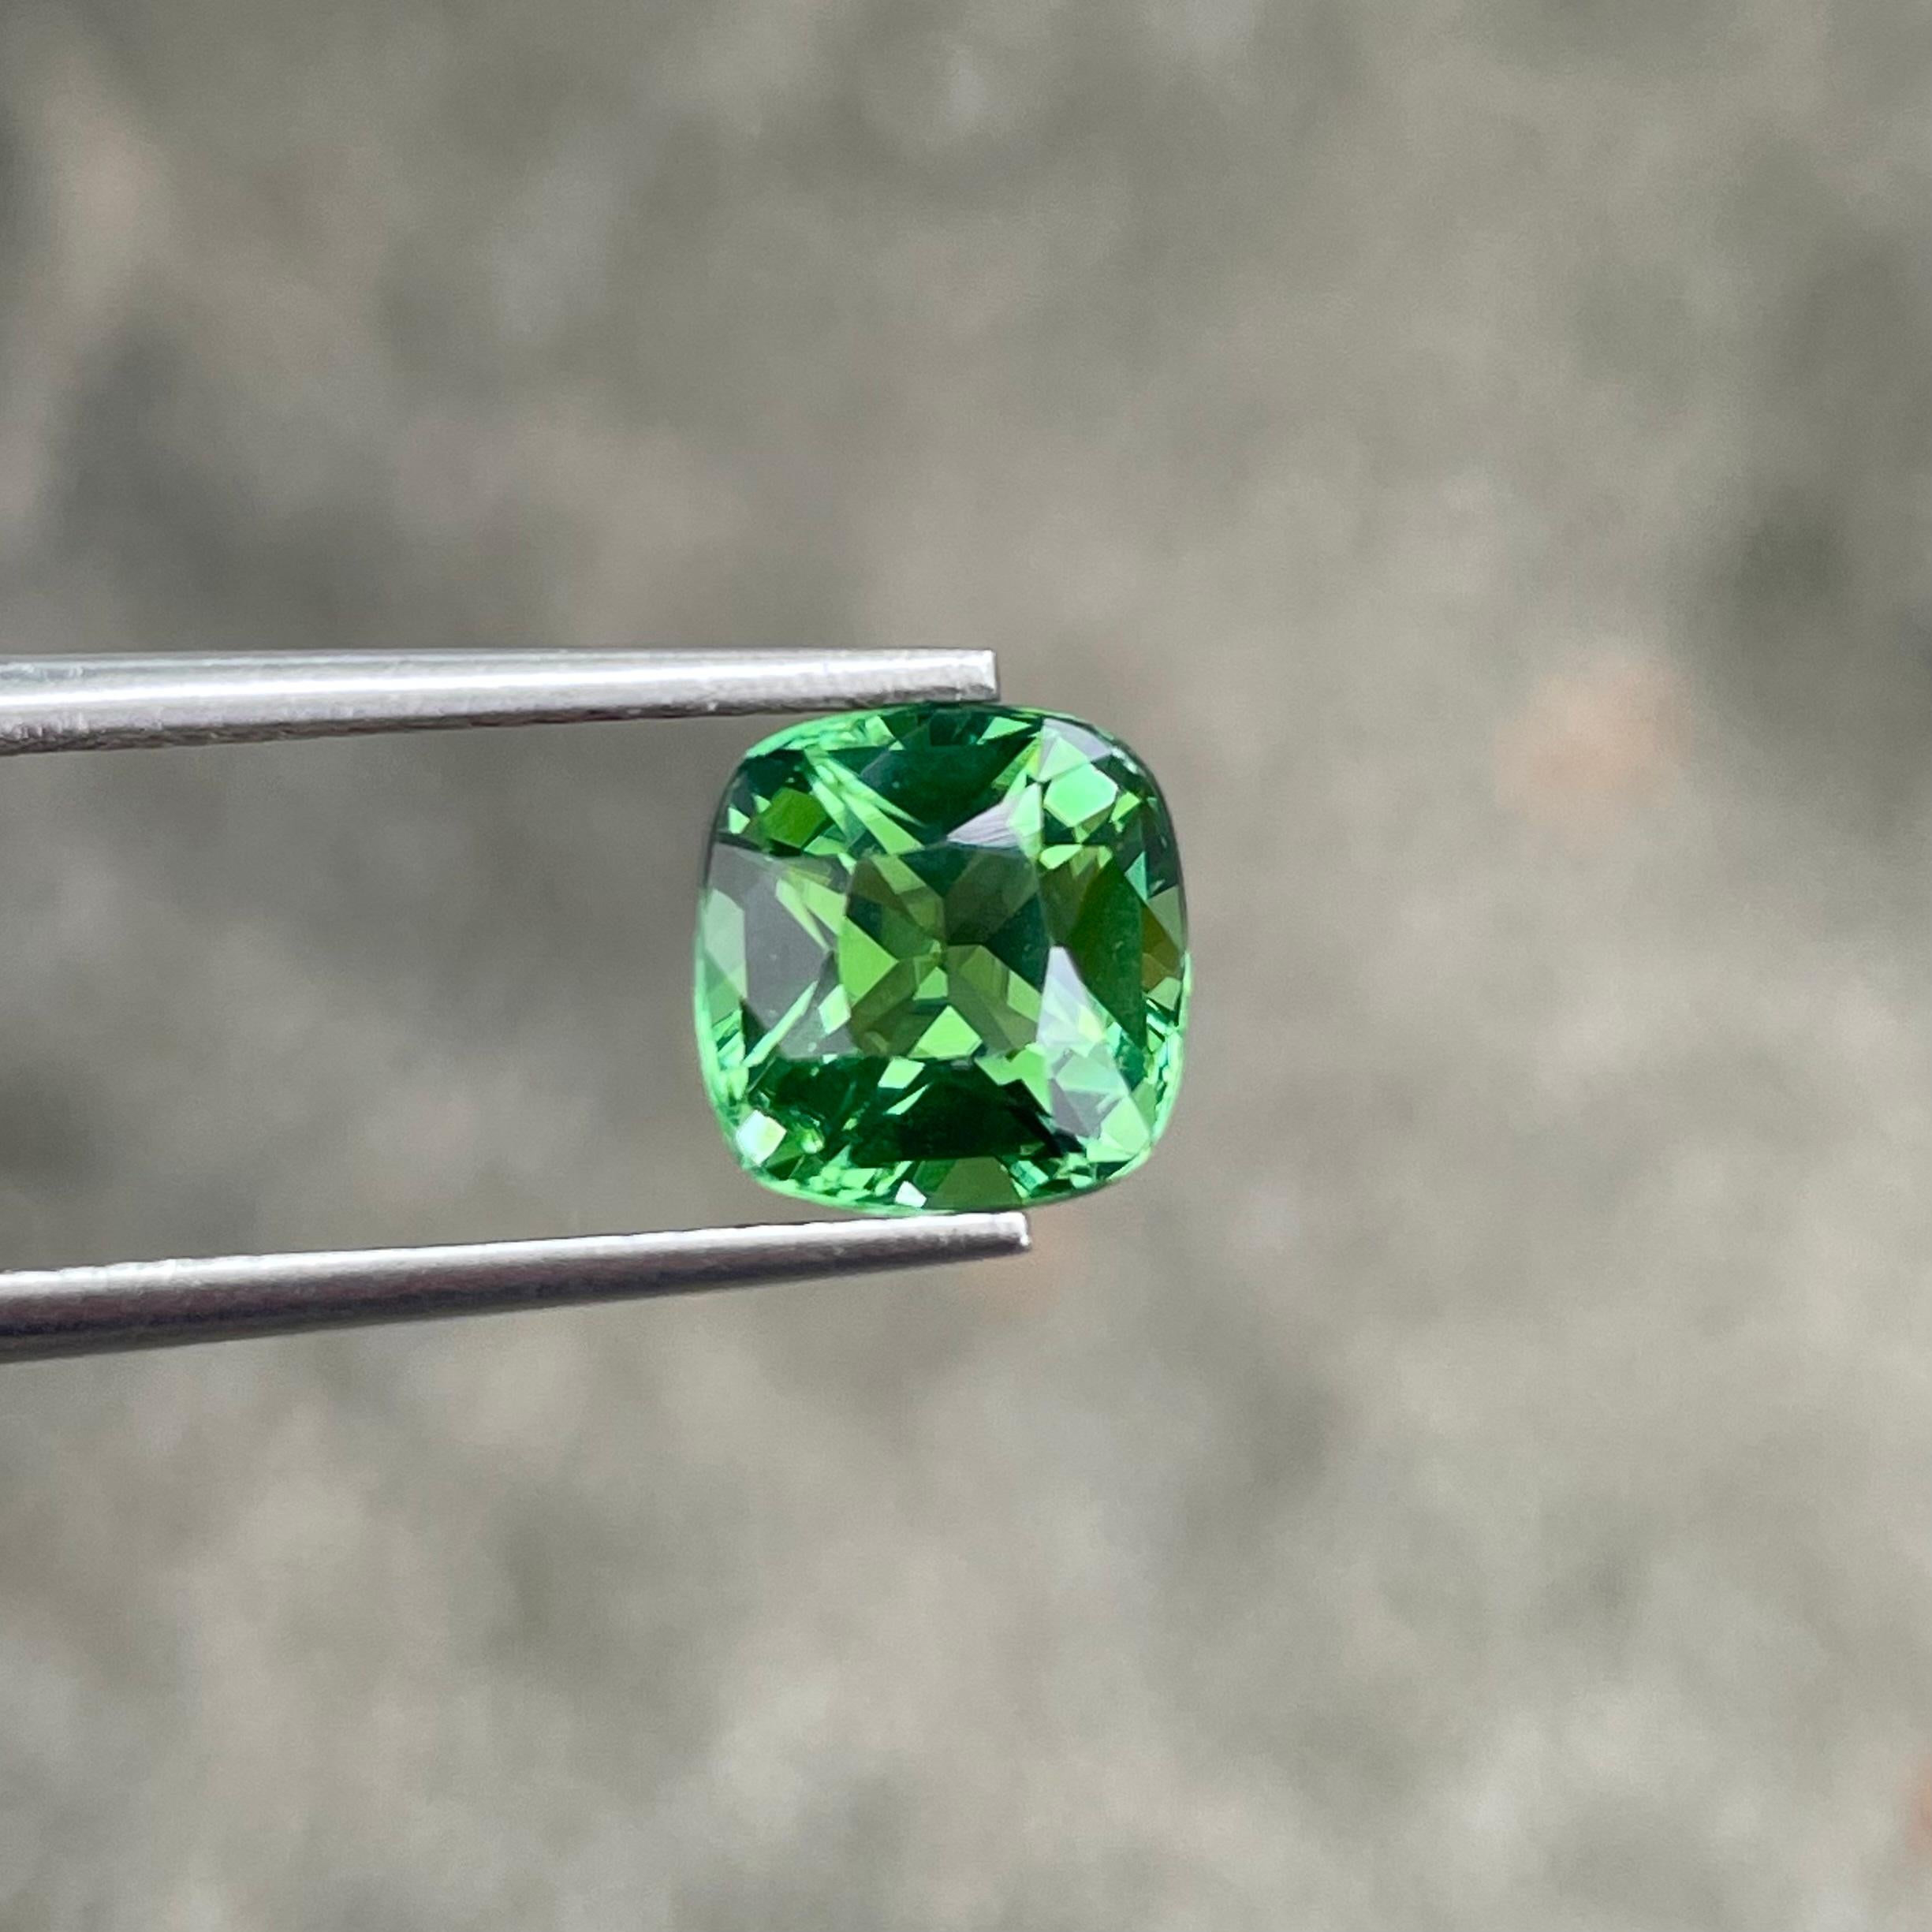 Weight 2.85 carats 
Dimensions 8.5 x 8.2 x 5.8 mm
Treatment None 
Origin Afghanistan 
Clarity VVS (Very, Very Slightly Included)
Shape Cushion 
Cut Fancy Cushion



Experience the allure of natural Afghan Mint Green Tourmaline, a gemstone prized for